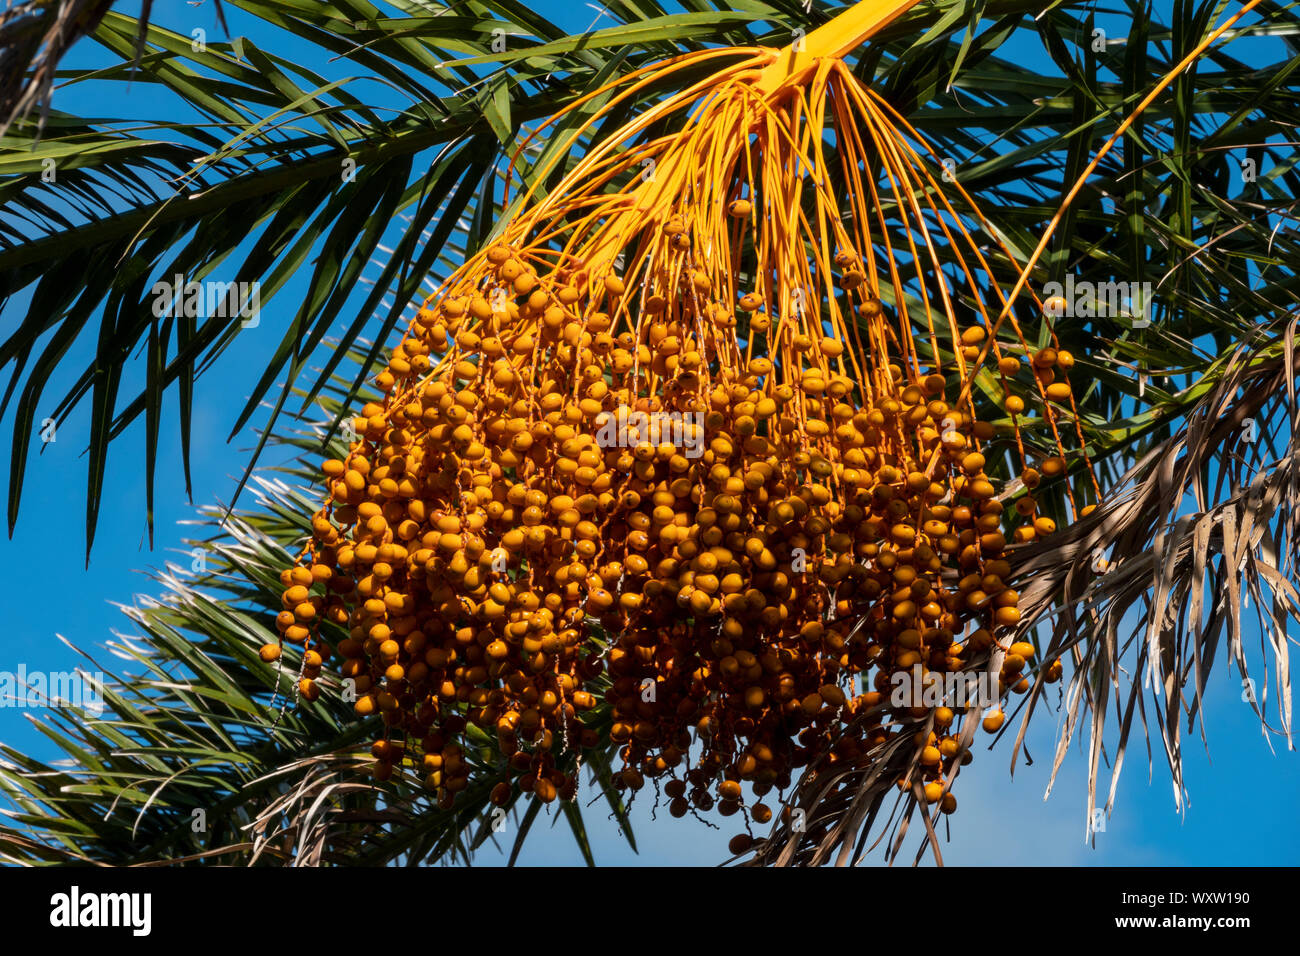 A detail of hanging date palm seeds with palm leaves and blue sky in the background Stock Photo